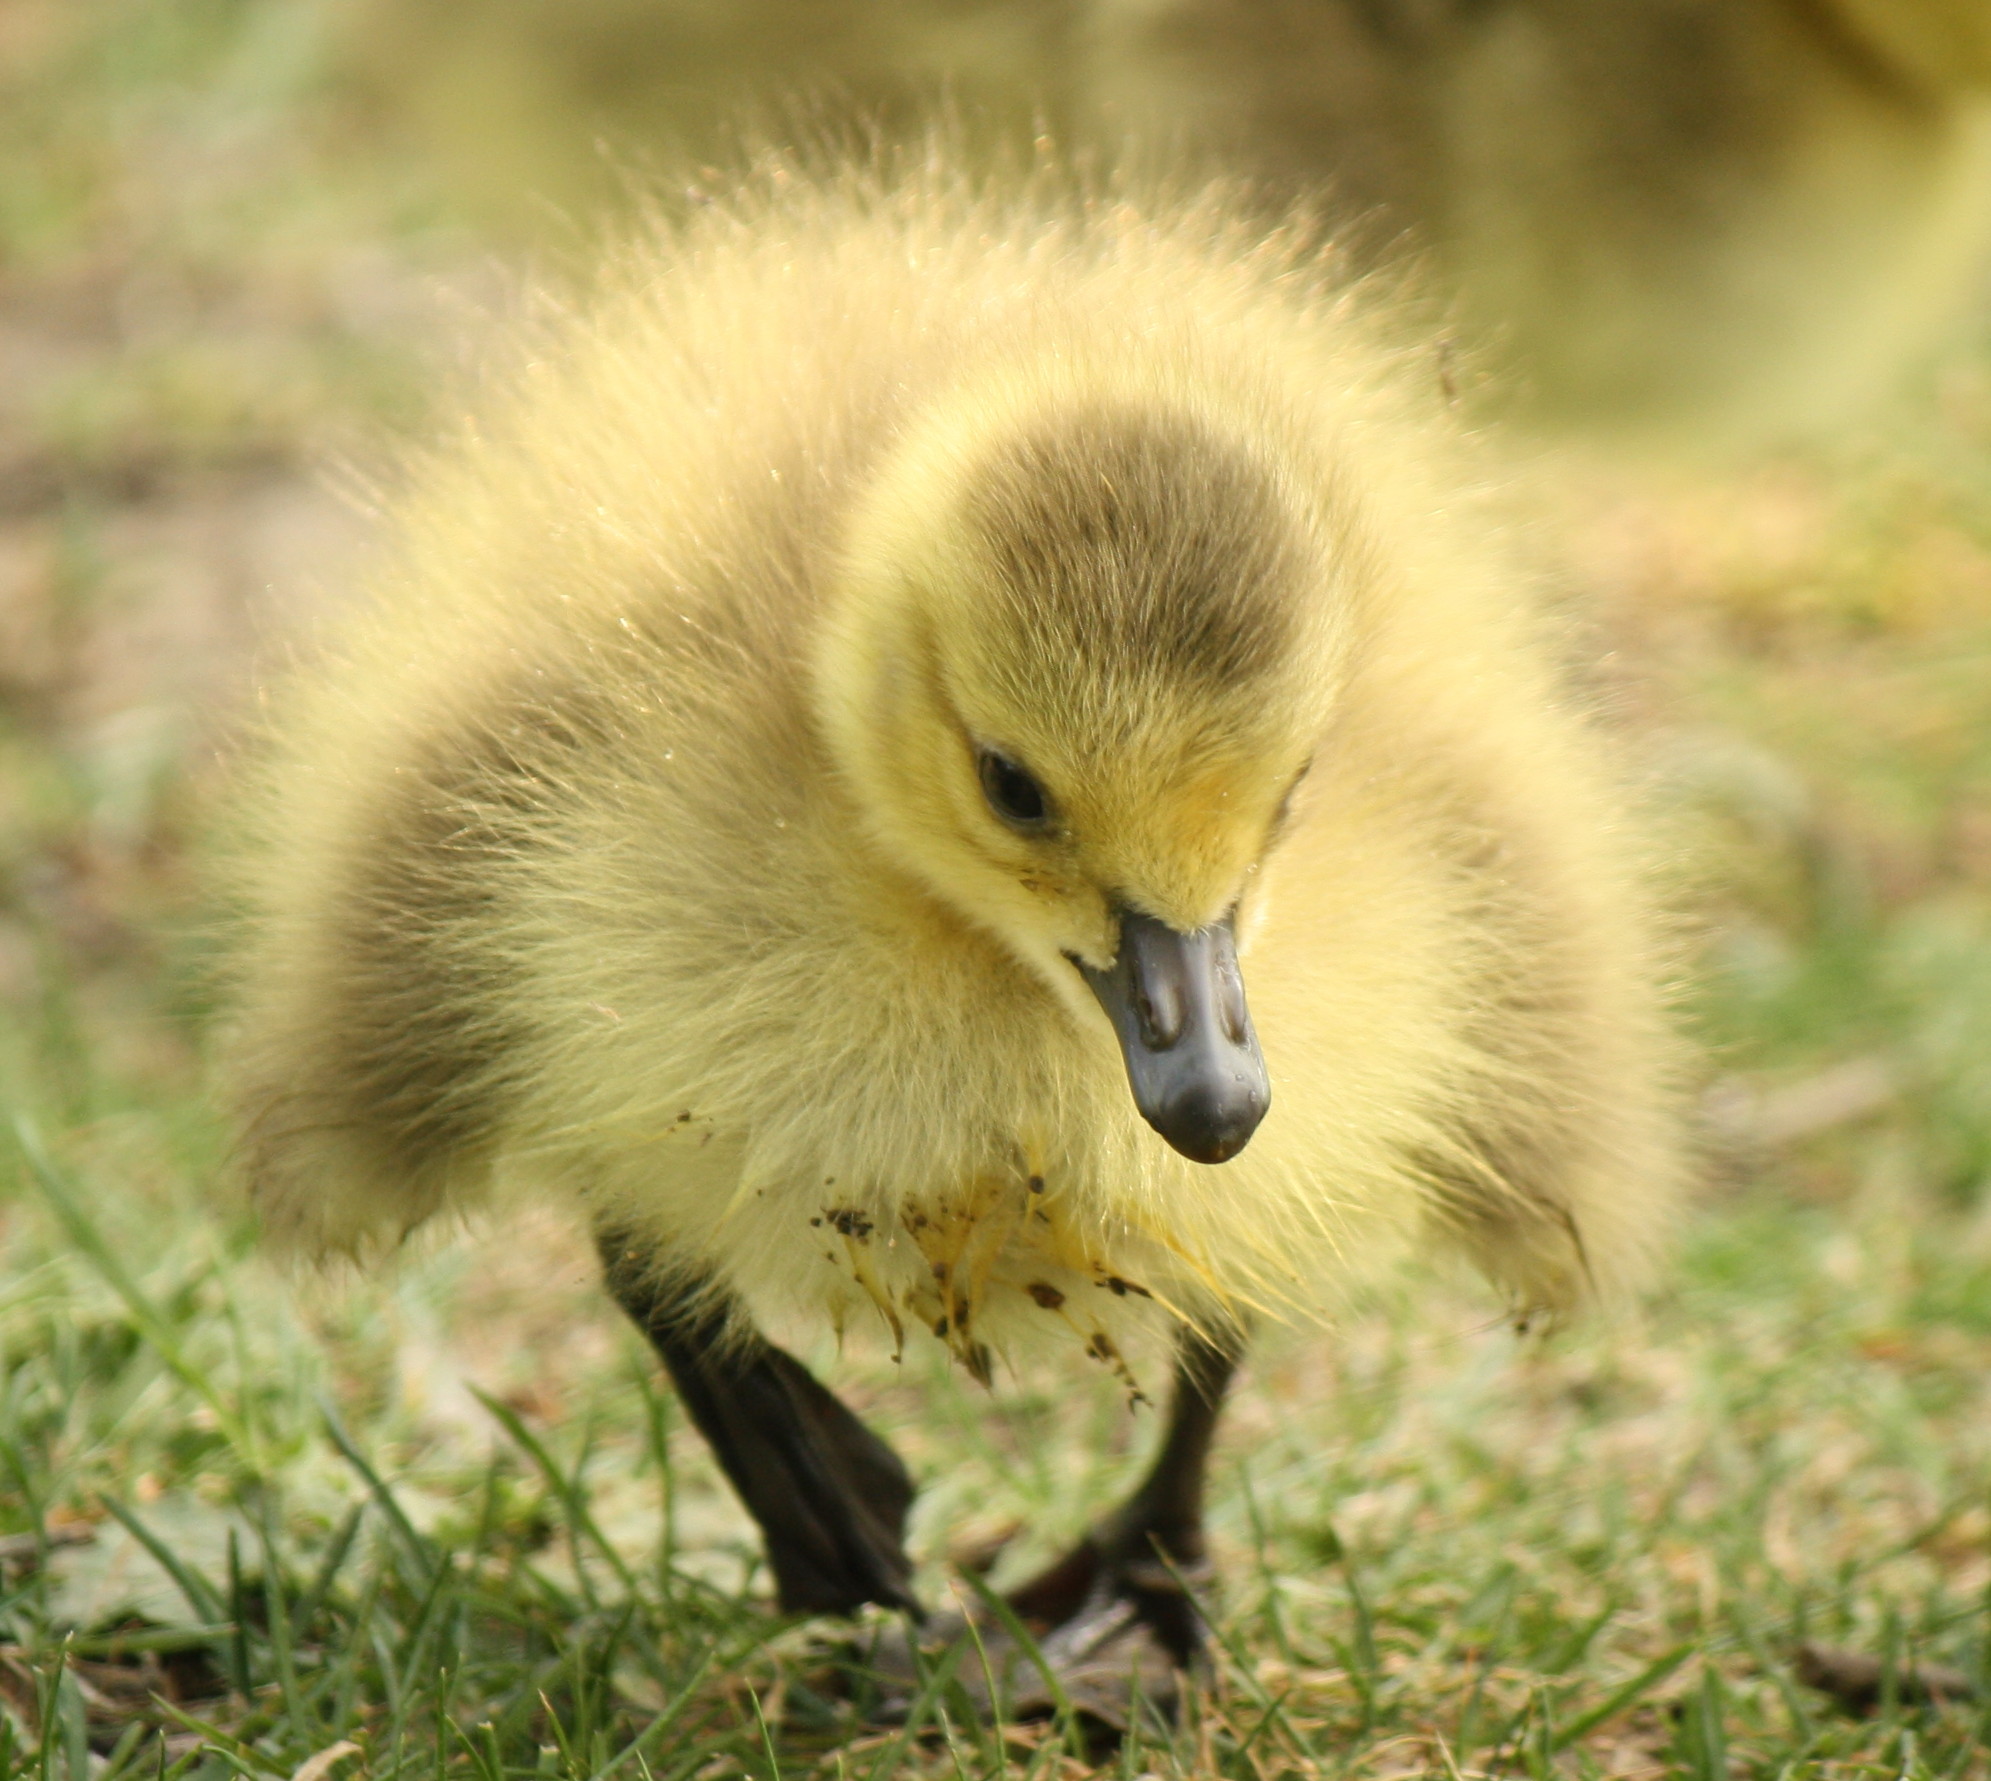 a small duckling walking through a grass covered field